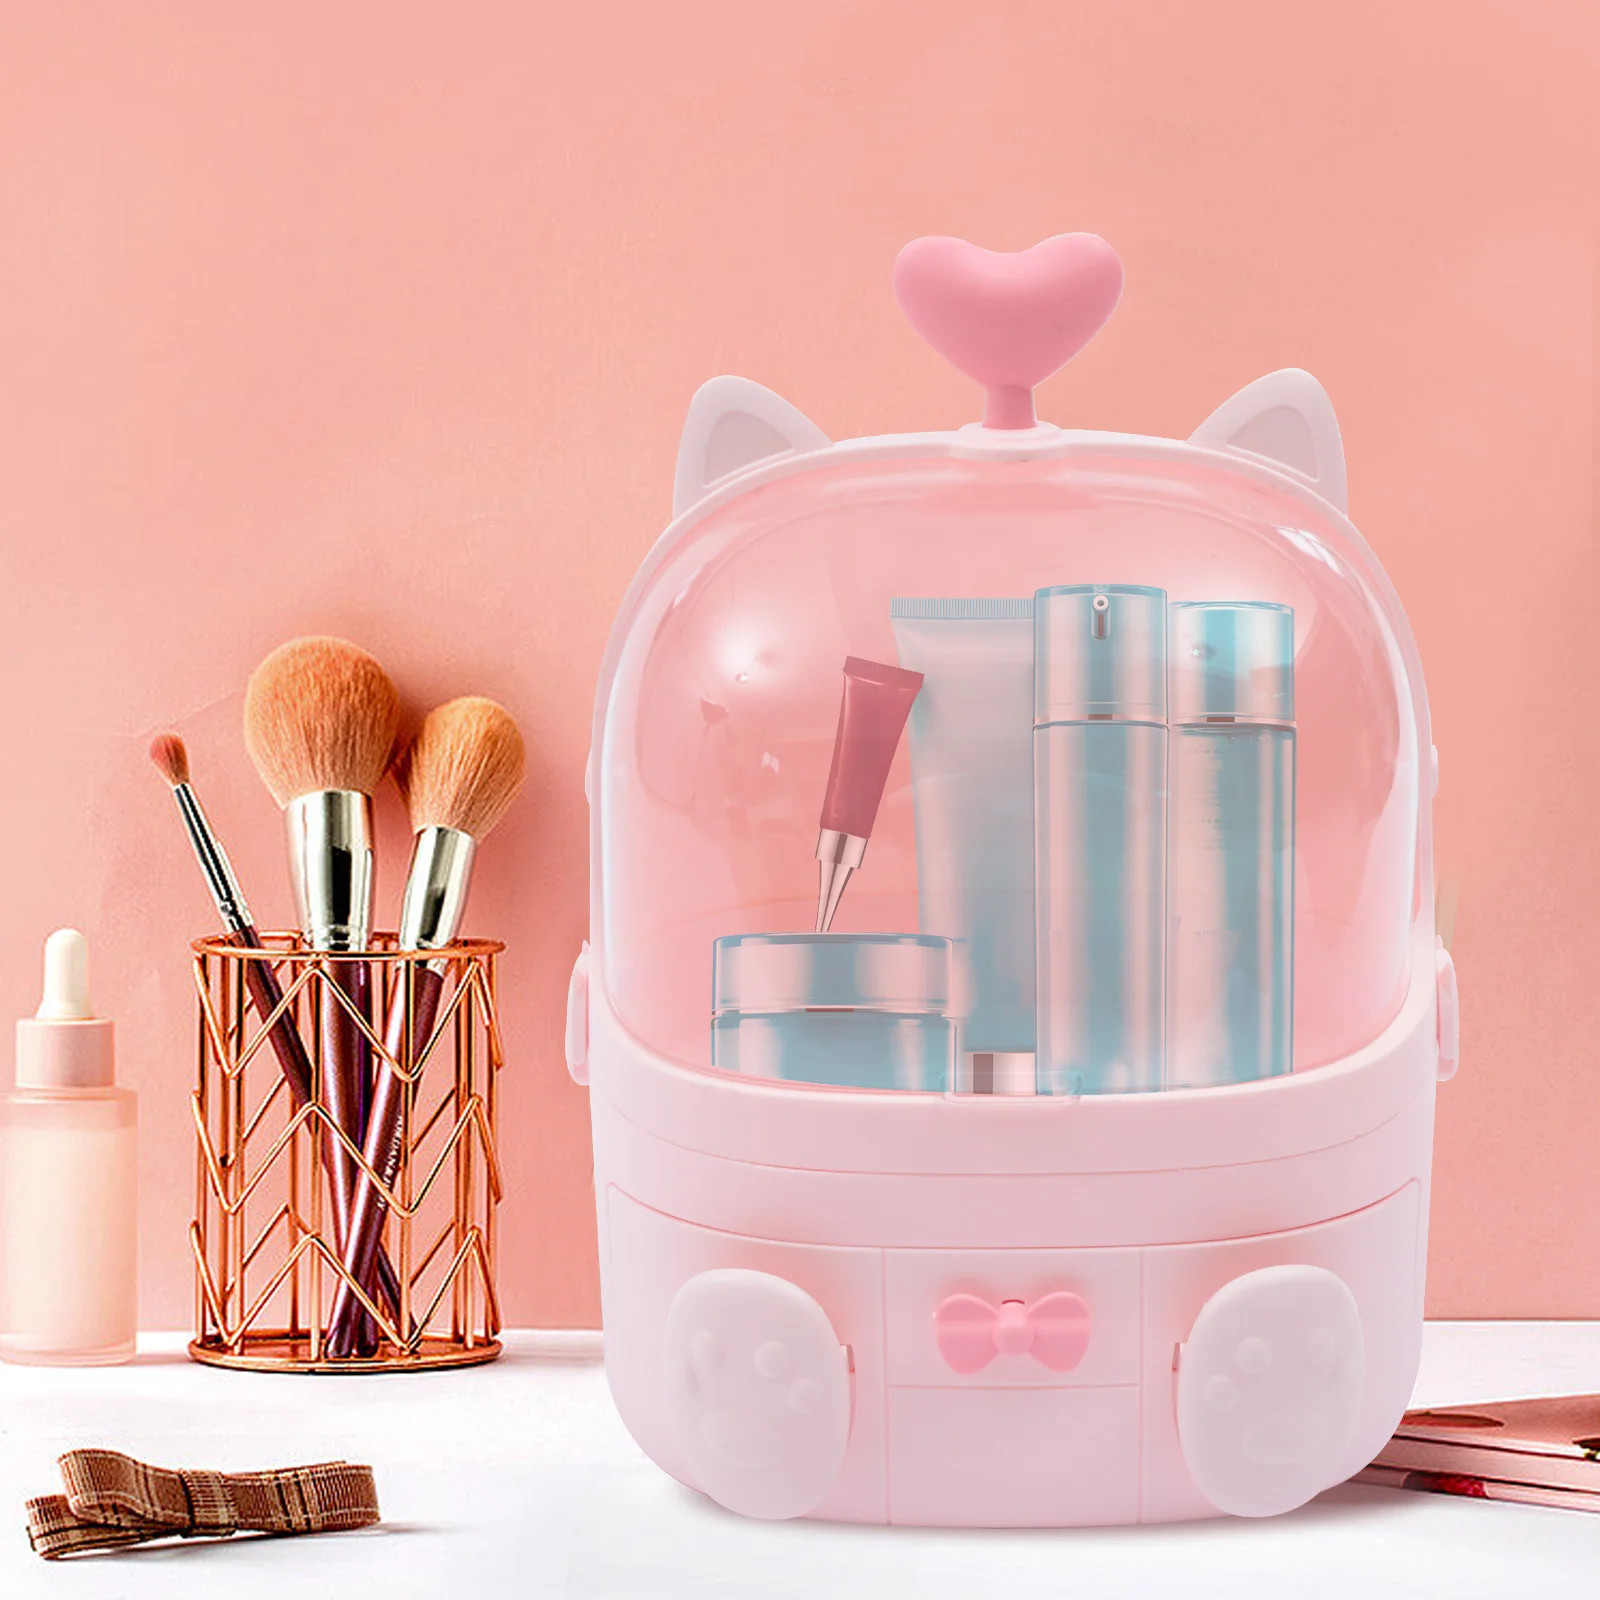 

Cute Cat Shape Makeup Organizer Countertop with Handle Plastic Large Cosmetic Storage Display Boxes Drawers Set Lipstick Holder